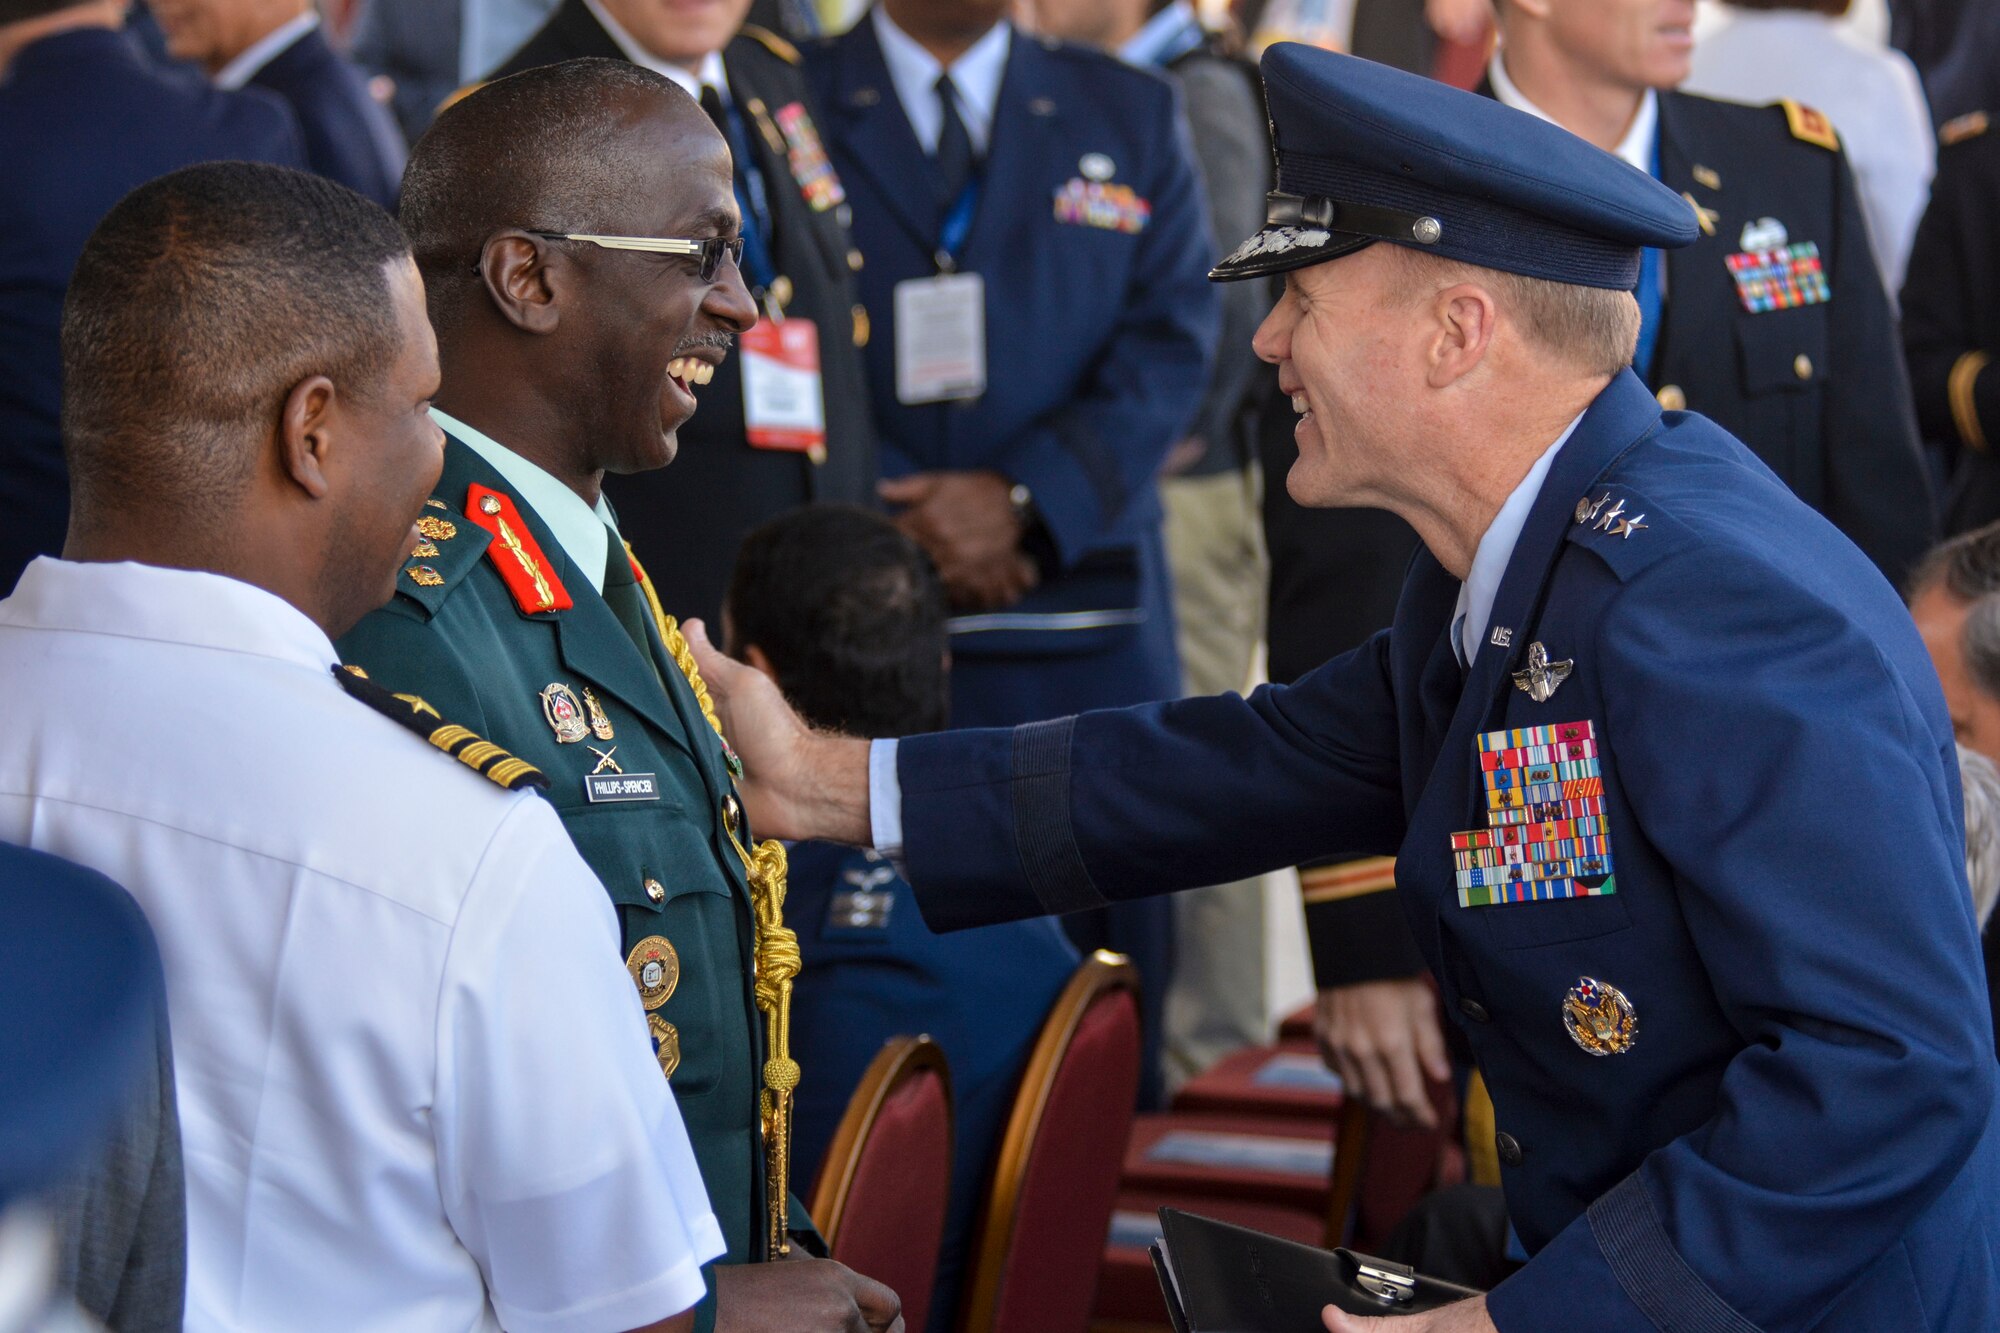 Lt. Gen. Tod Wolters, 12th Air Force (Air Forces Southern) commander, greets Brig. Gen. Anthony Phillips-Spencer, vice chief of Defence Staff of the Trinidad and Tobago Defence Force, just before the FIDAE Air Show opening ceremony in Santiago, Chile, March 25. Nearly 60 U.S. airmen are participating in subject matter expert exchanges with Chilean air force counterparts during FIDAE, and as part of the events will host static displays of the C-130 Hercules and F-16 Fighting Falcon. The exchanges, conducted regularly throughout the year, involve U.S. Airmen sharing best practices and procedures to build partnerships and promote interoperability with partner-nations throughout South America, Central America and the Caribbean. (U.S. Air Force photo by Capt. Justin Brockhoff/Released)